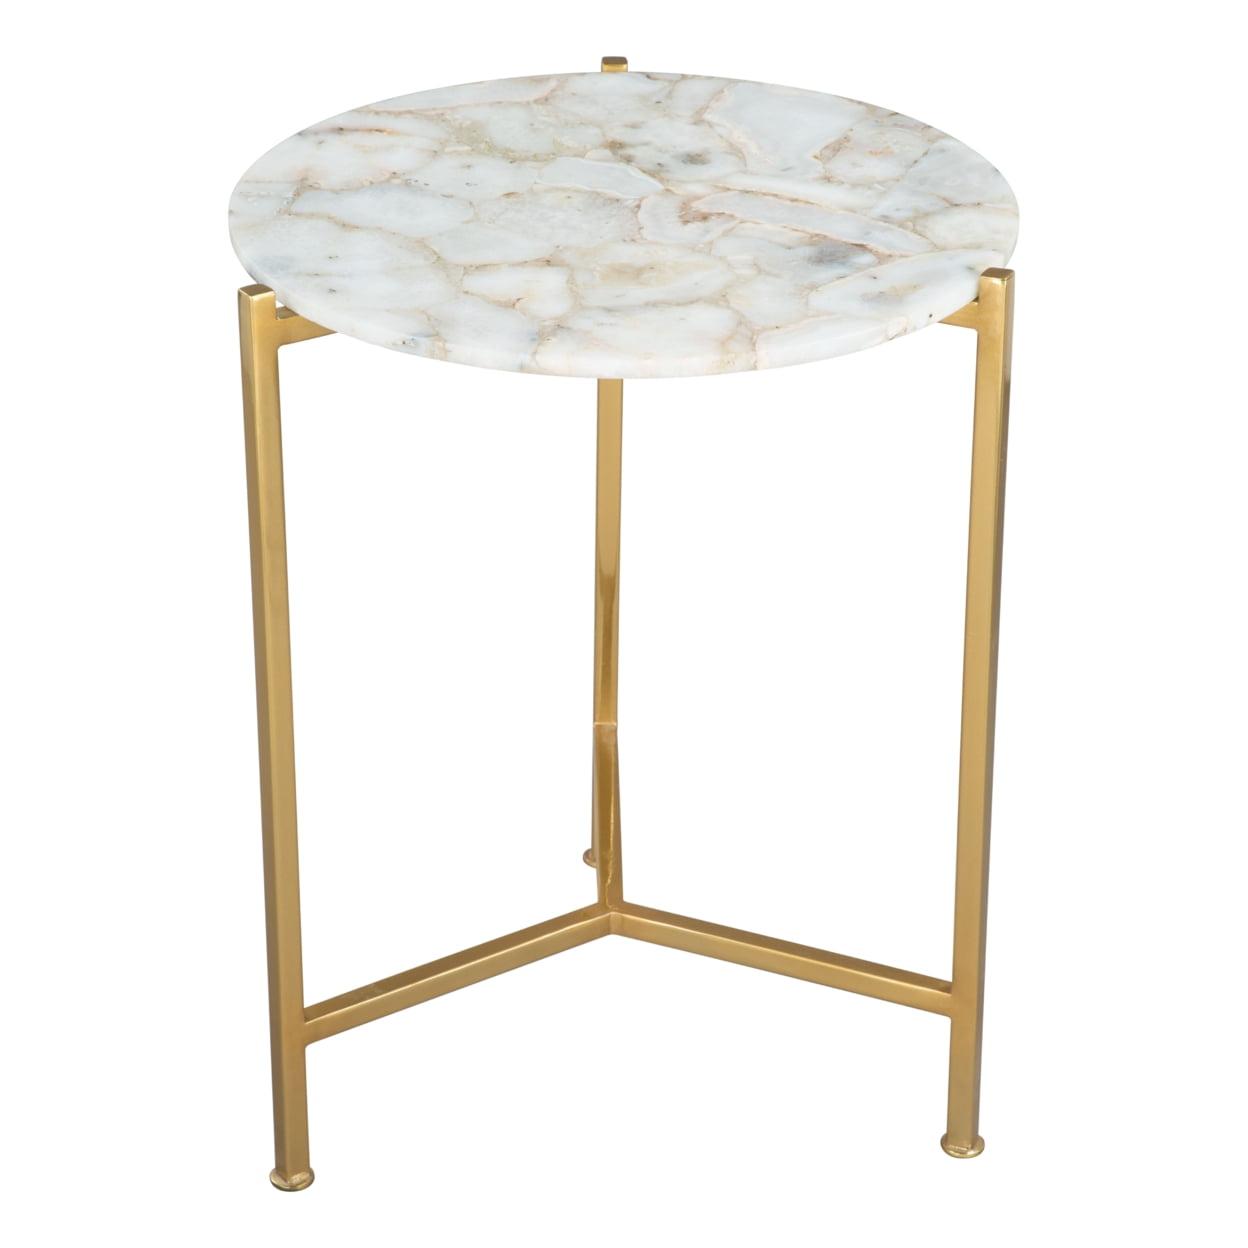 Haru Round Agate Stone Top White & Gold Side Table